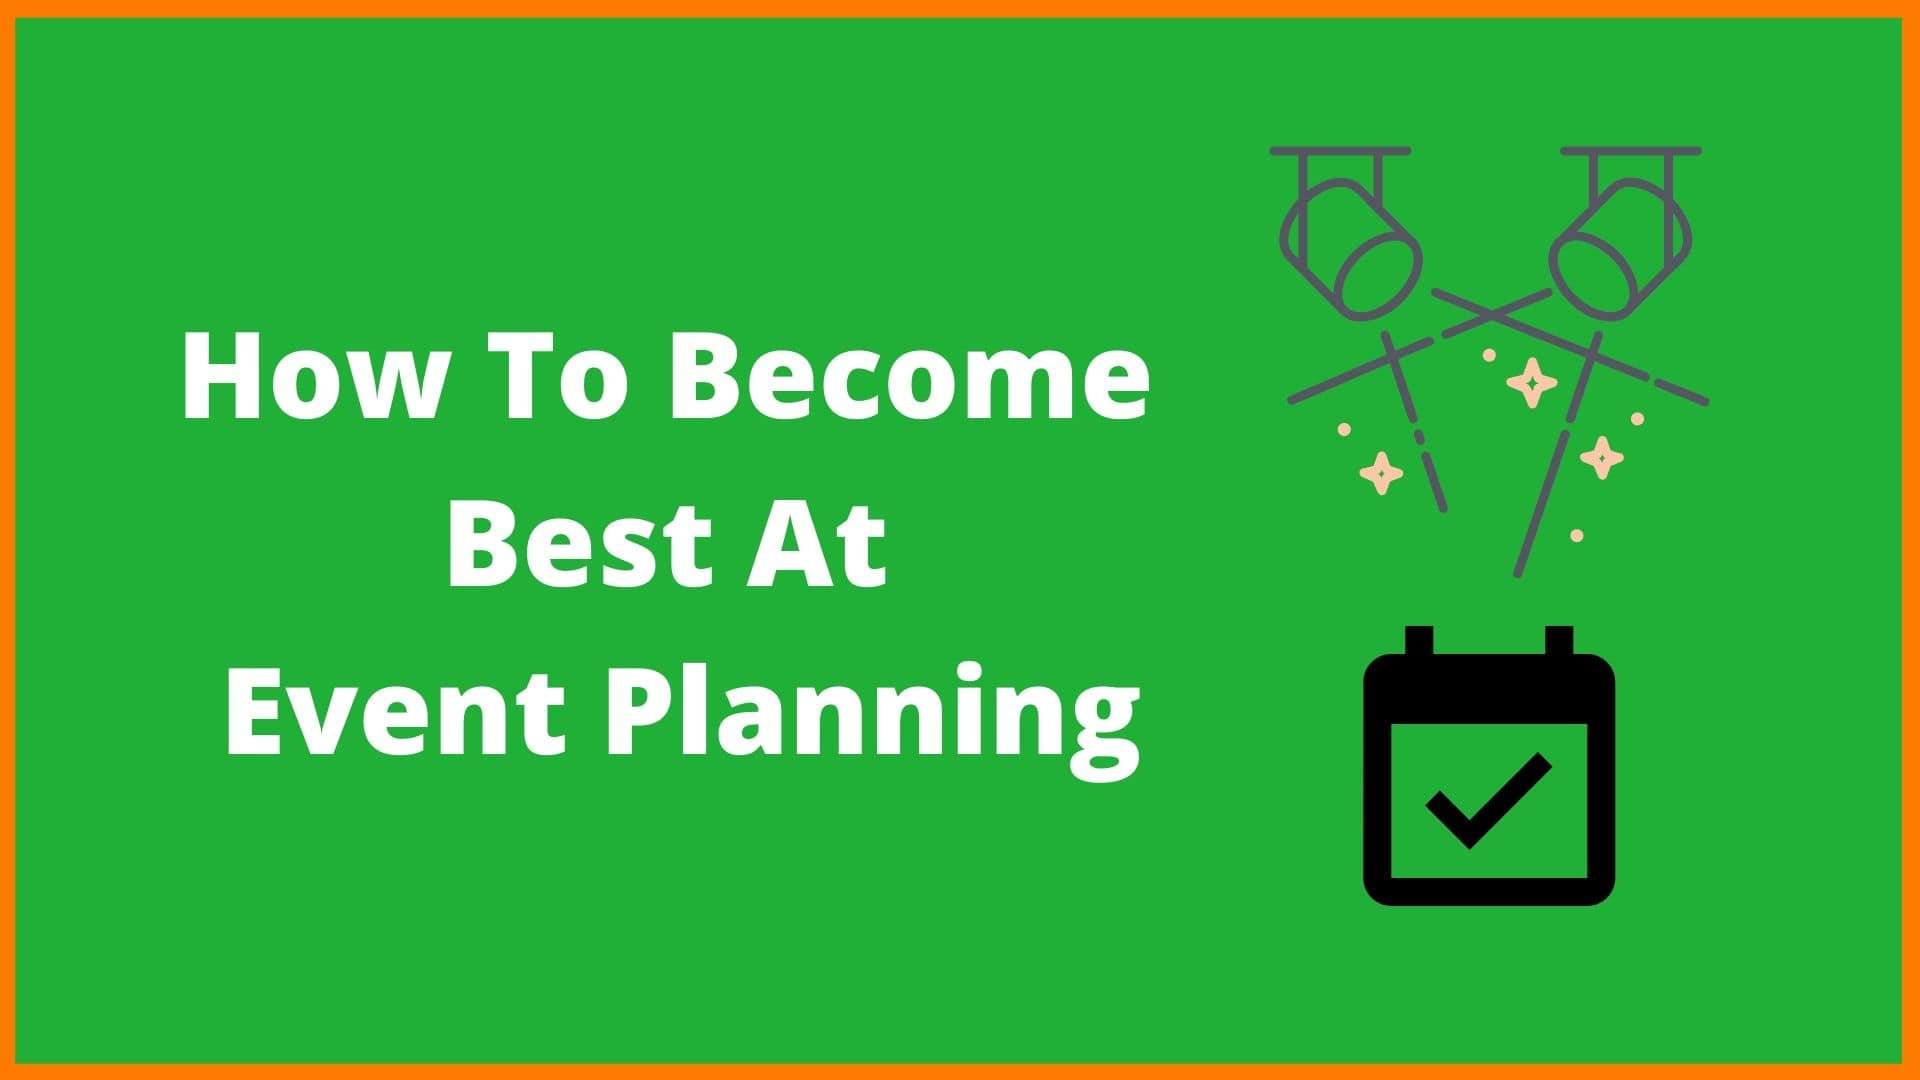 How To Become Best At Event Planning